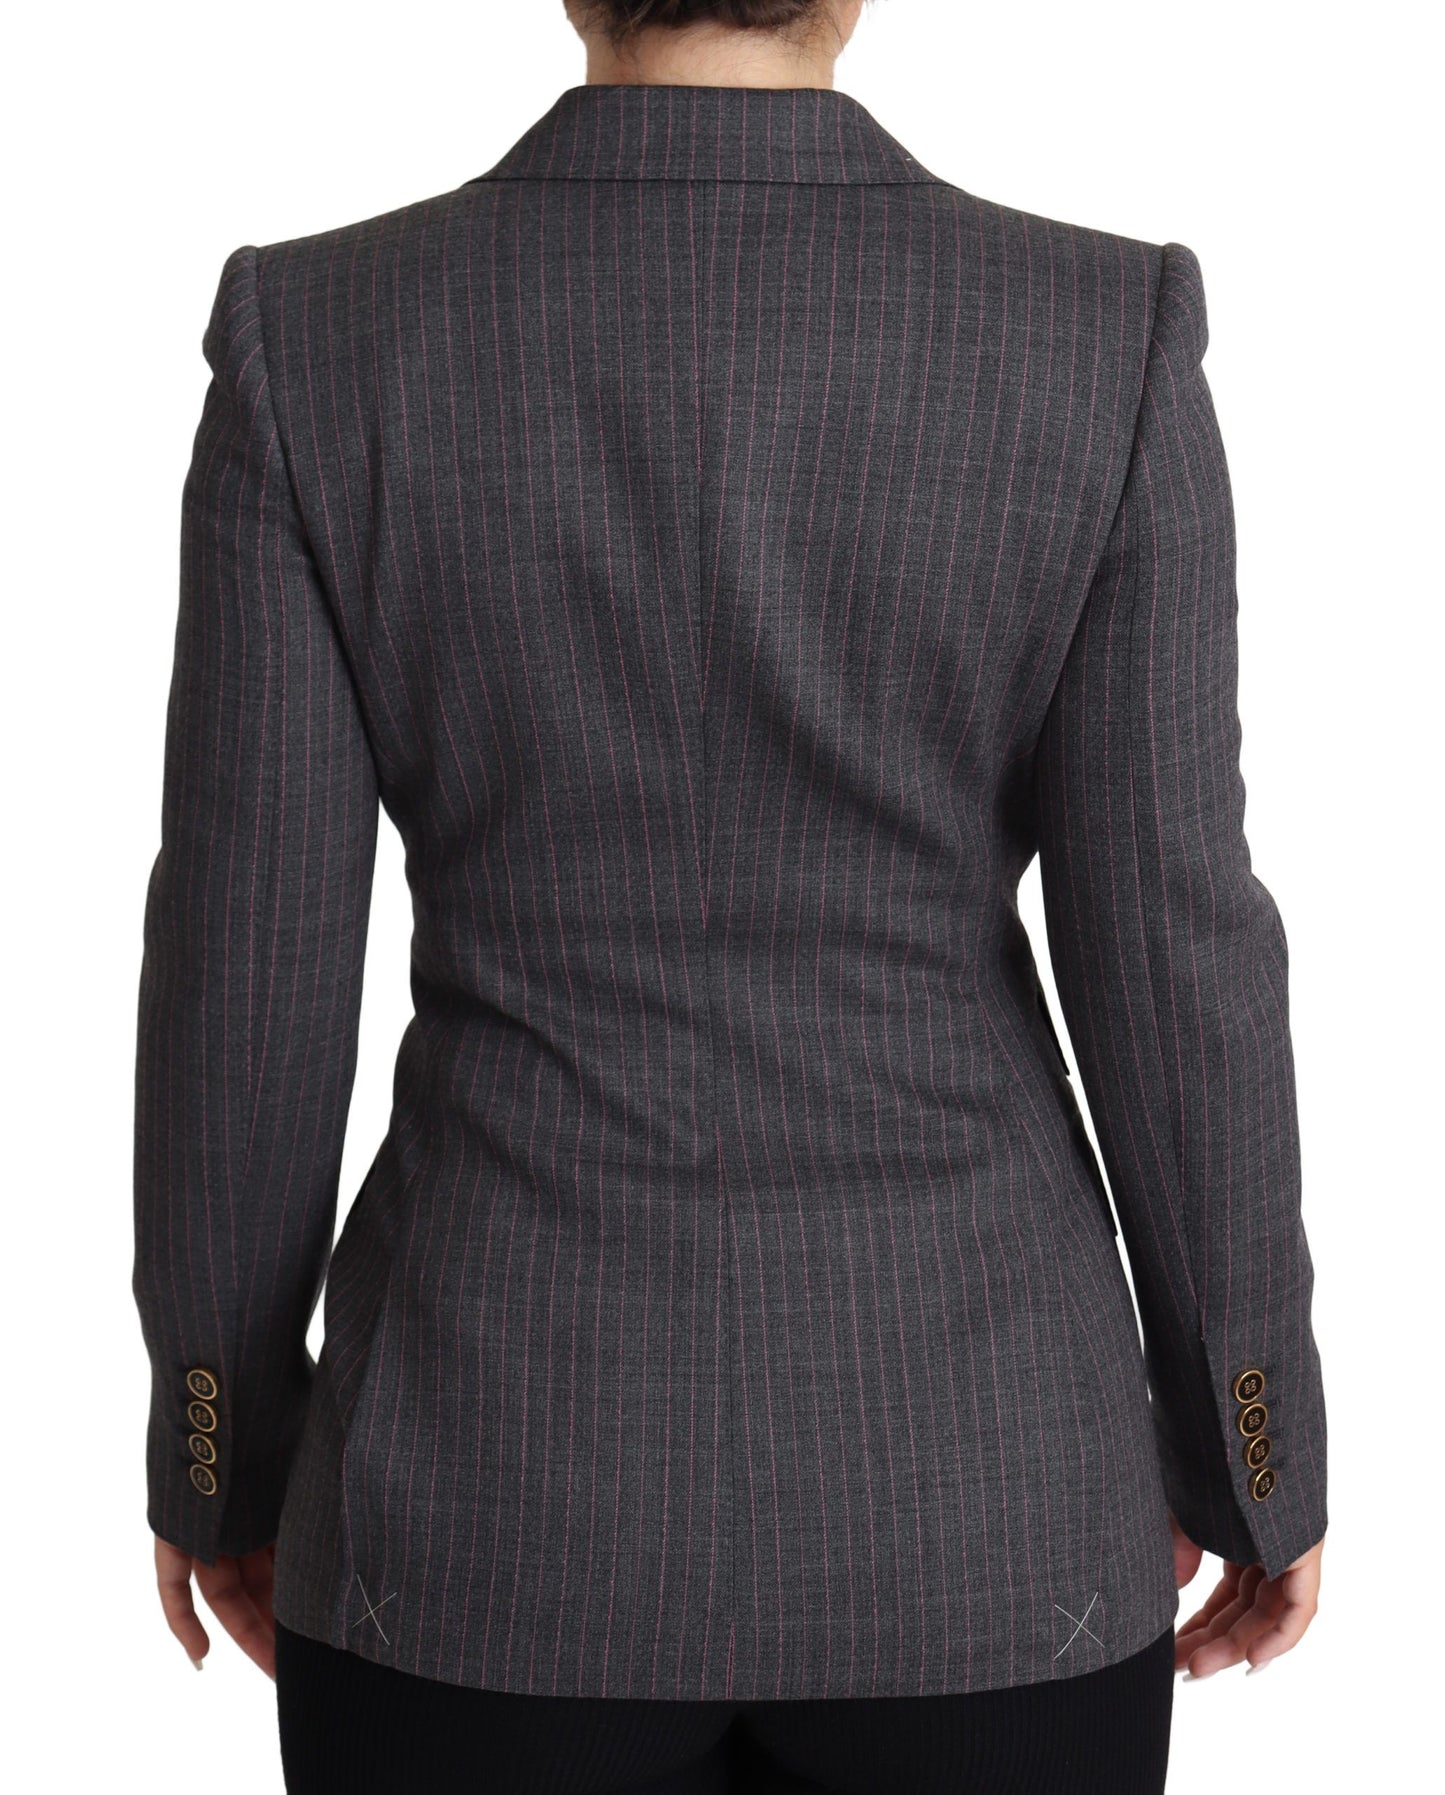 Grey Single Breasted Fitted Blazer Wool Jacket